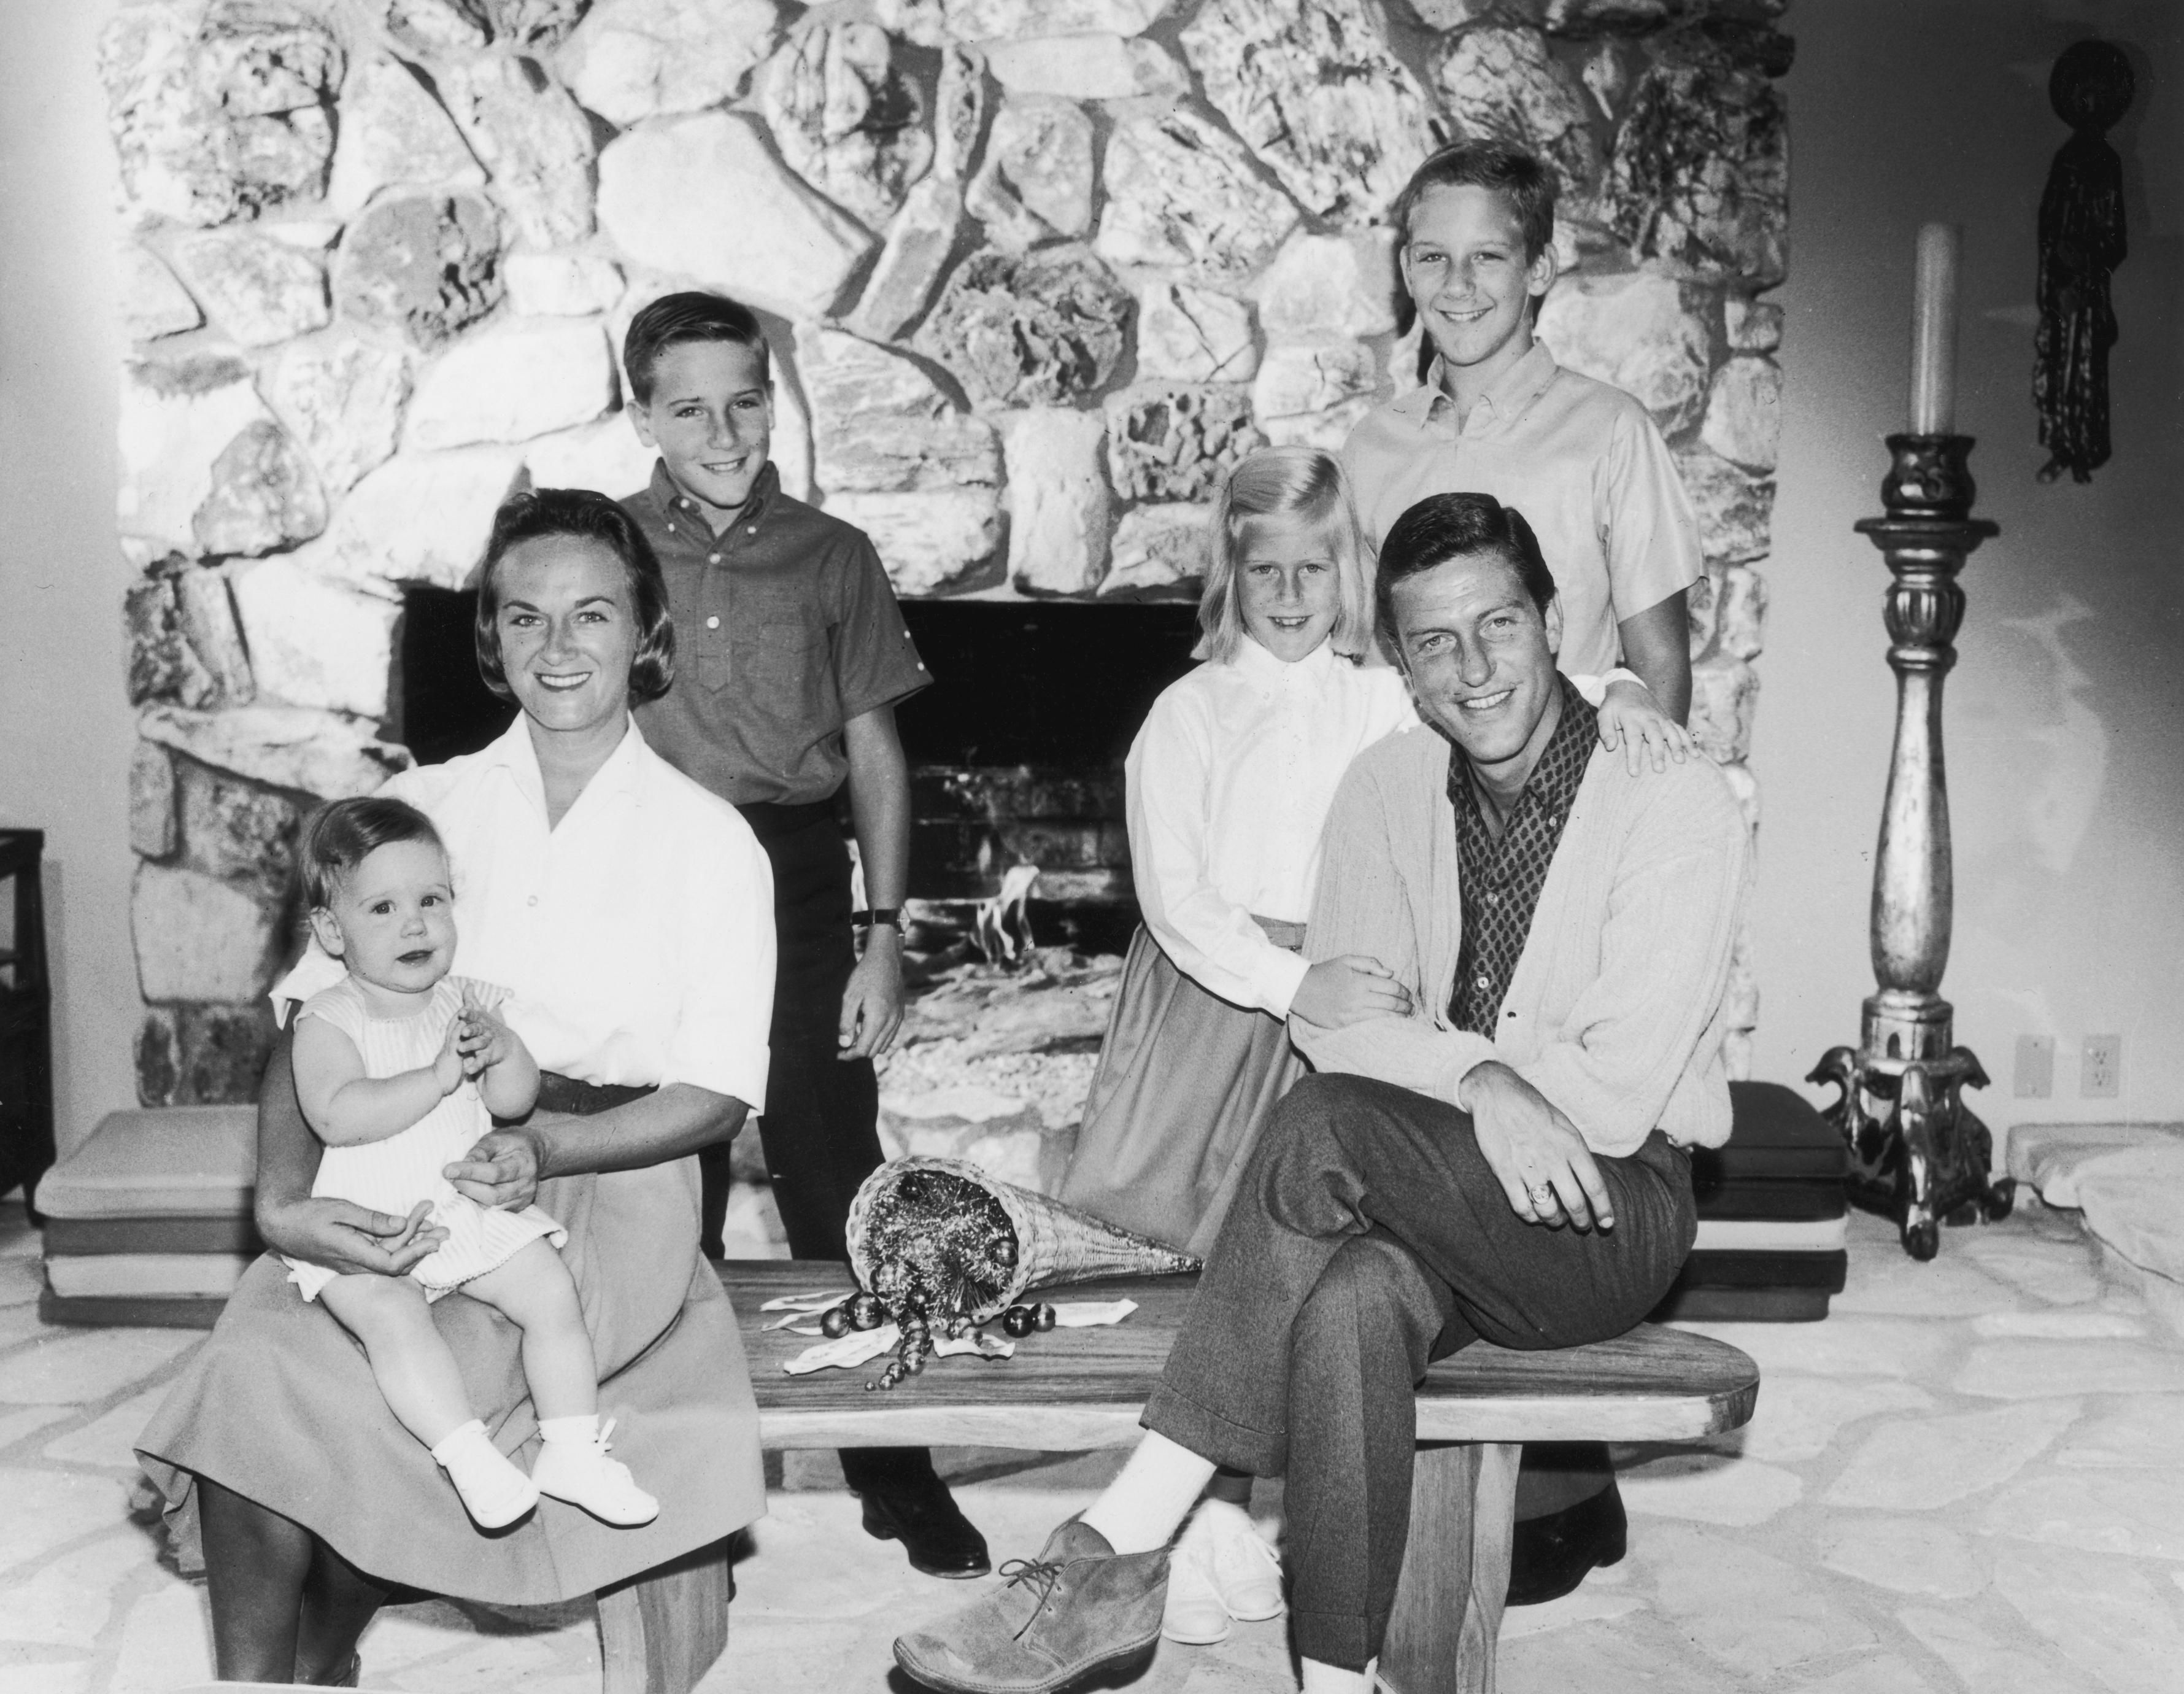 Dick Van Dyke with his wife, Margie Willet, posing in front of a fire place with their four children: Barry, Carrie, Chris, and Stacey Van Dyke. | Source: Getty Images